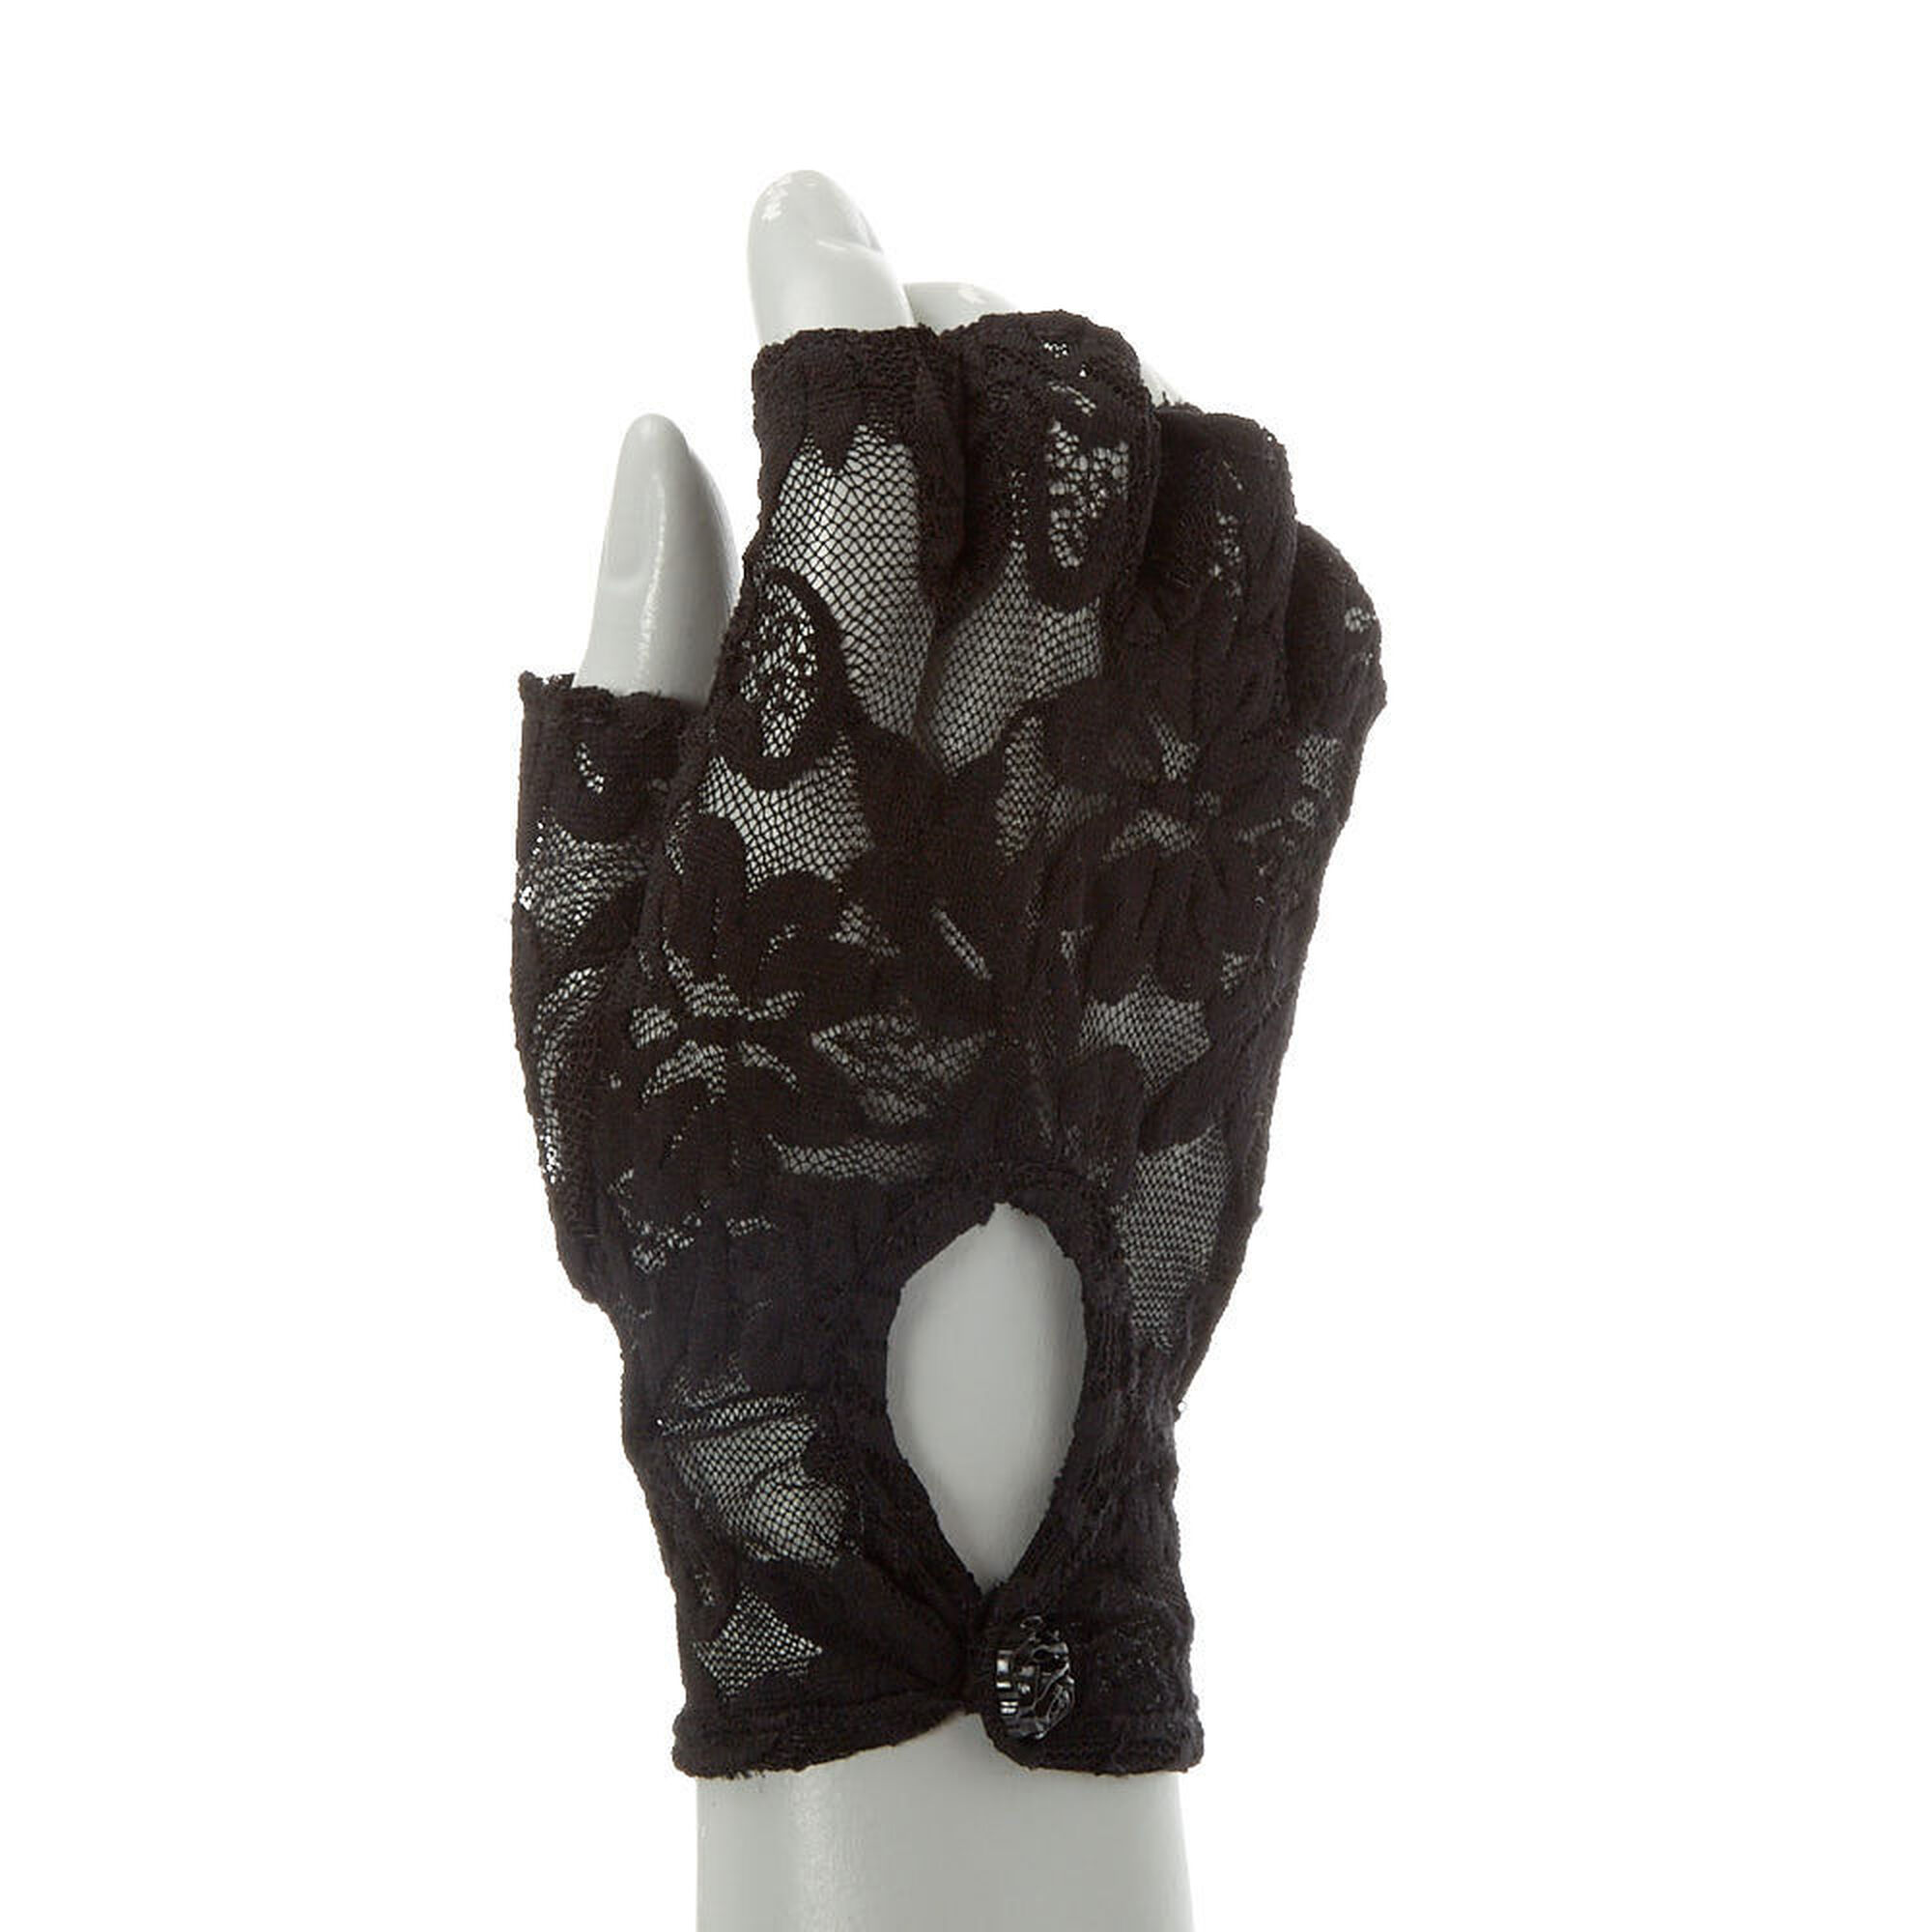 View Claires Lace Fingerless Gloves Black information